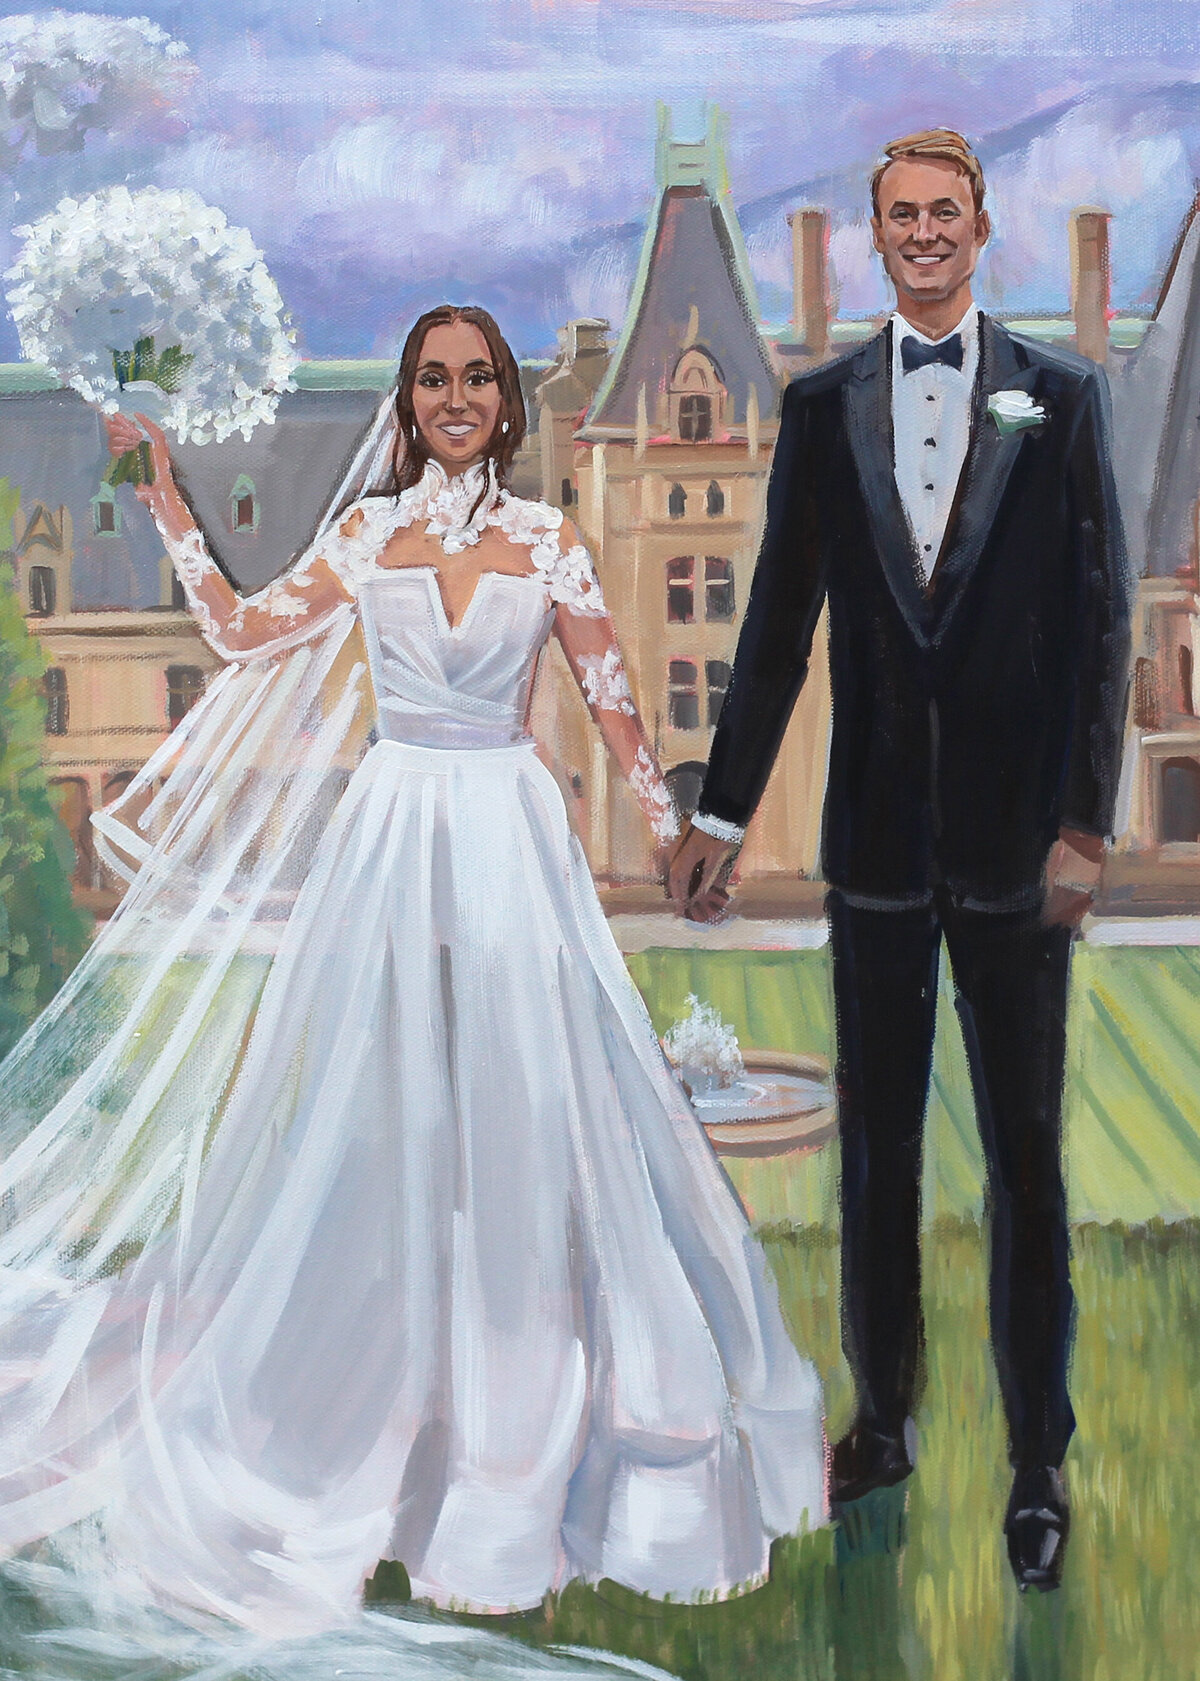 Live Wedding Paintings by Ben Keys | Haley and Rich, Live Wedding Painting, The Biltmore, Asheville, NC, detail